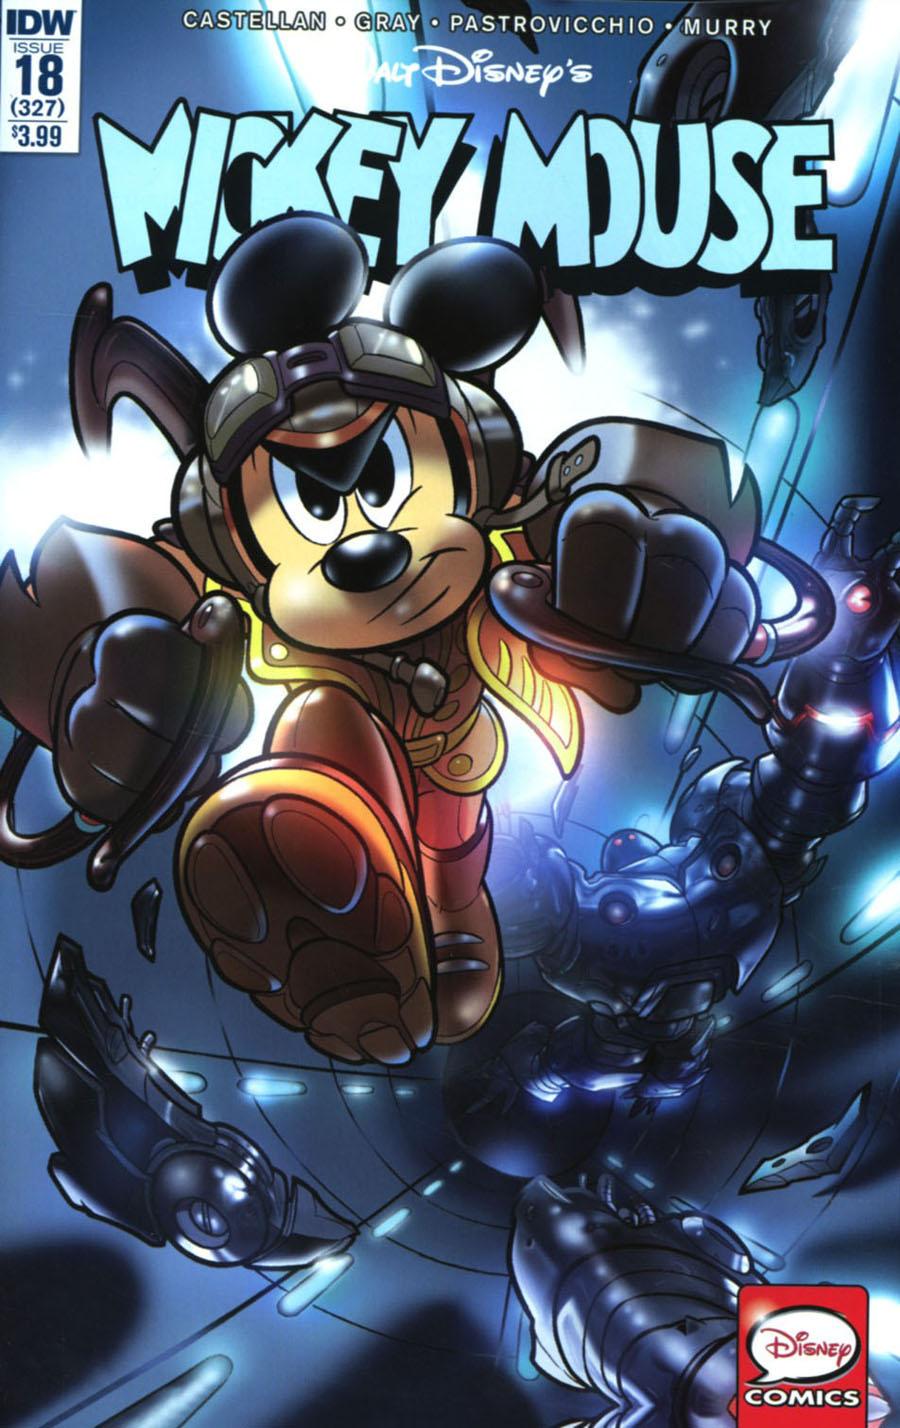 Mickey Mouse Vol. 2 #18